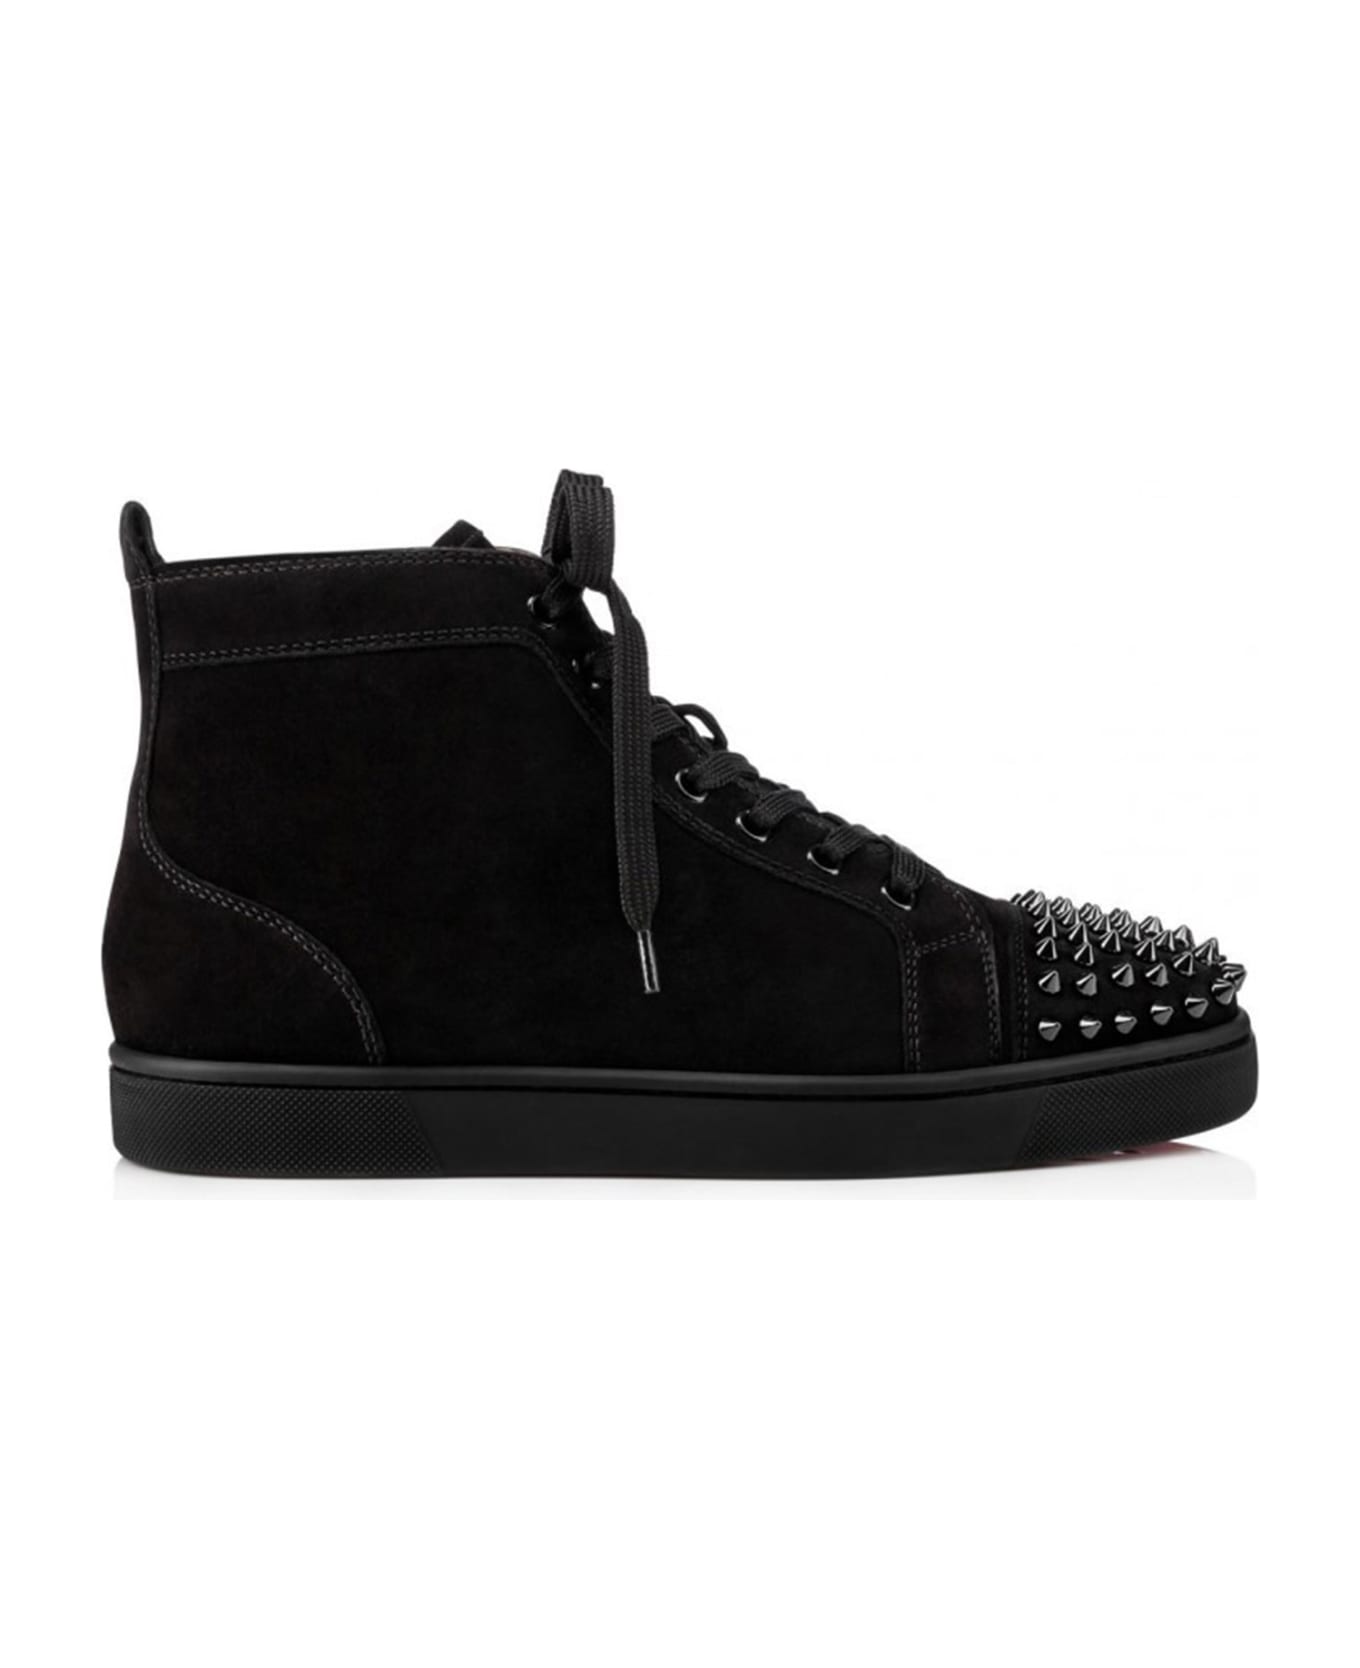 Christian Louboutin High-top Sneakers In Suede With Spikes - Black/black/bk